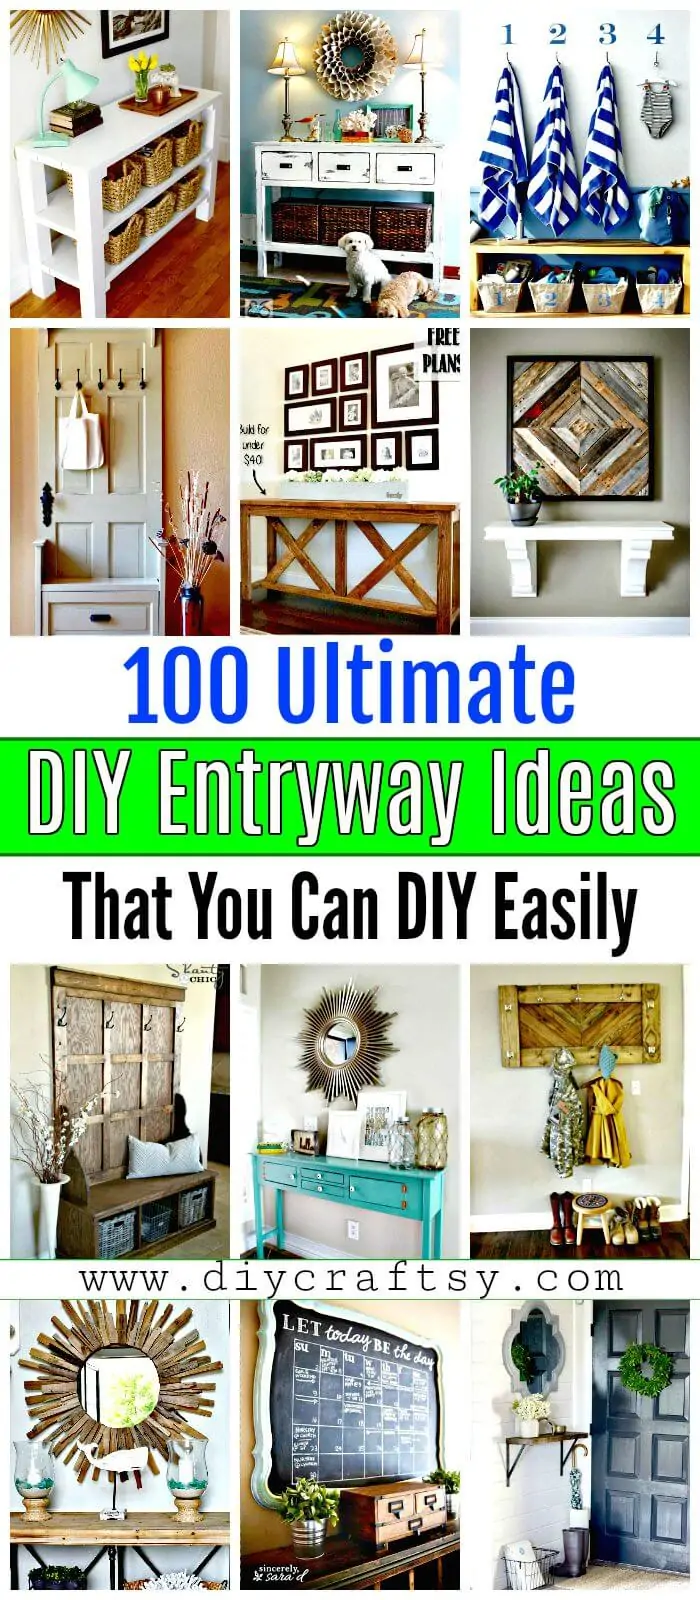 100-Ultimate-DIY-Entryway-Ideas-That-You-Can-DIY-Easily-DIY-Projects-DIY-Crafts